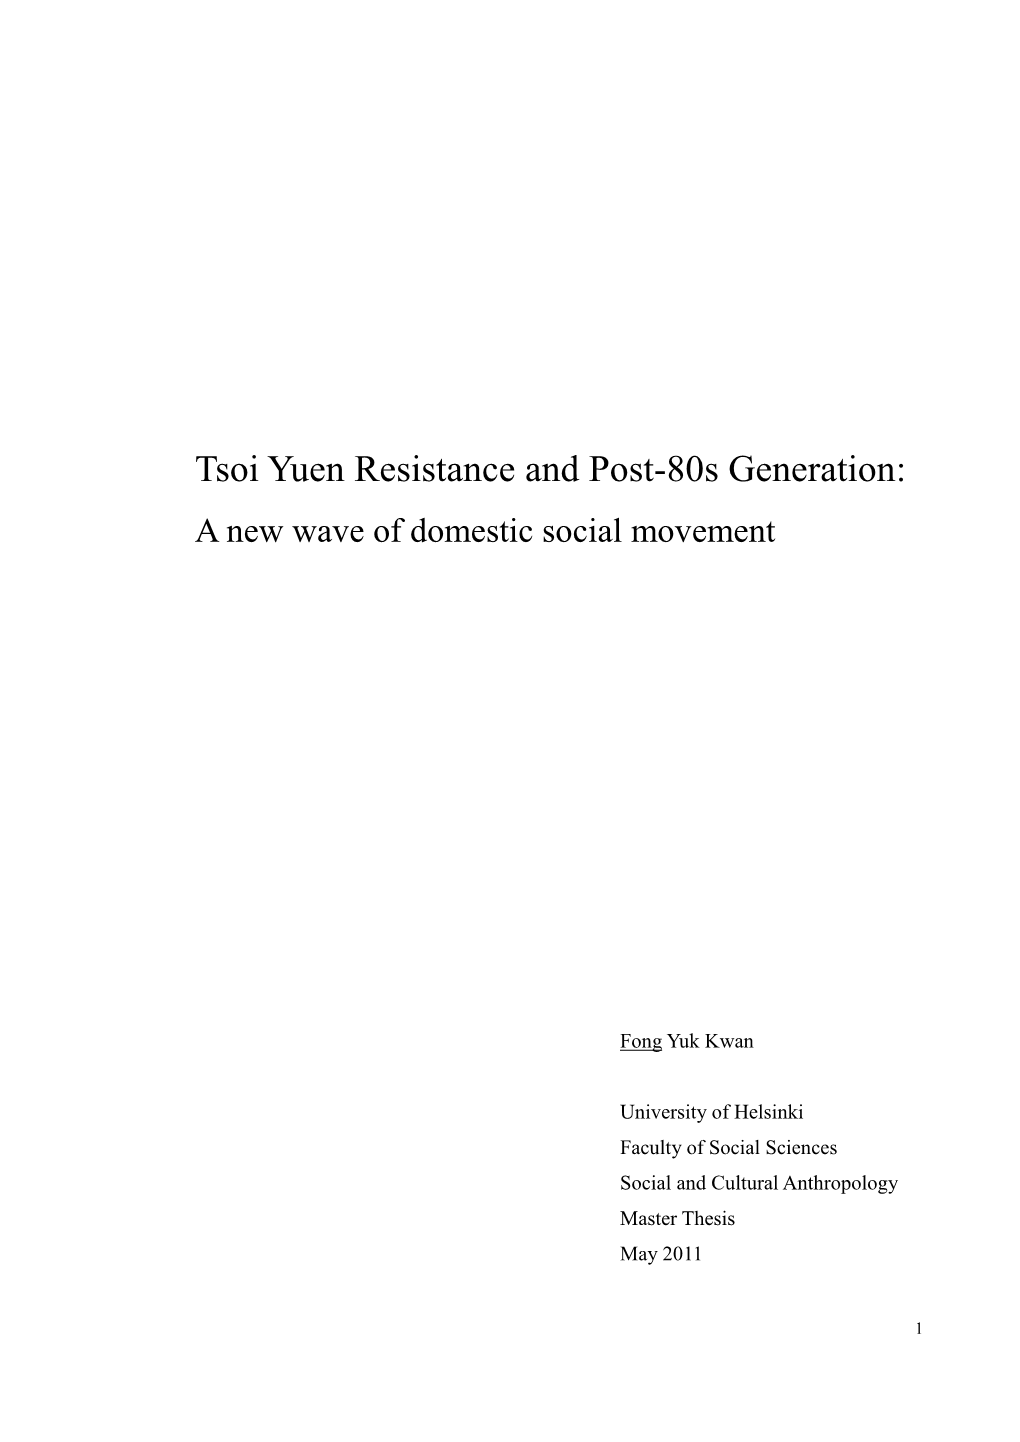 Tsoi Yuen Resistance and Post-80S Generation: a New Wave of Domestic Social Movement